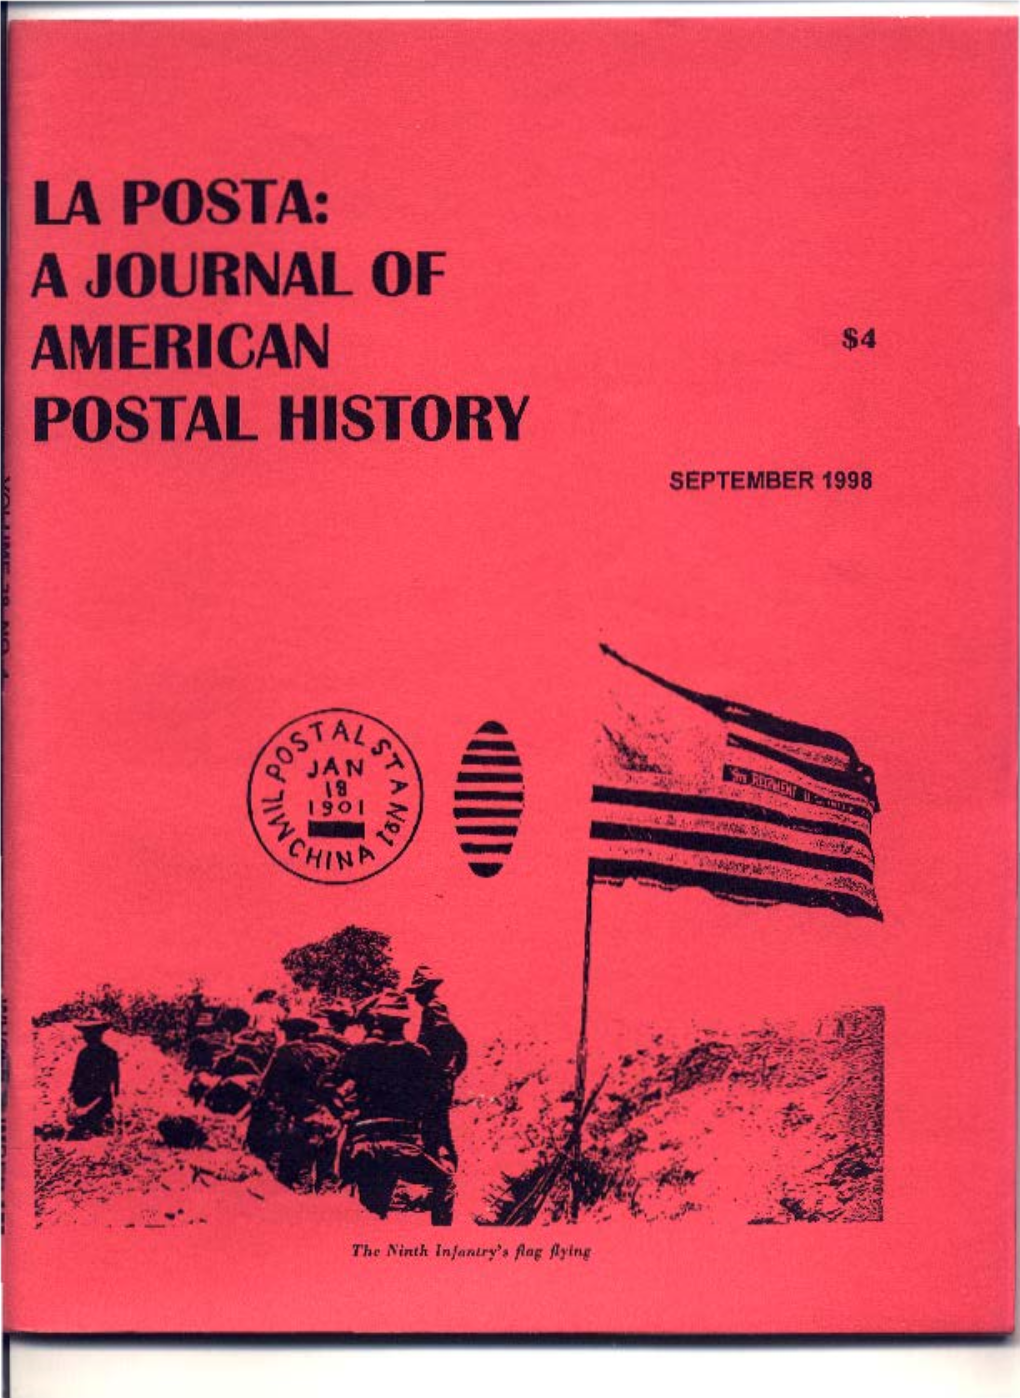 A Journal of American Postal History